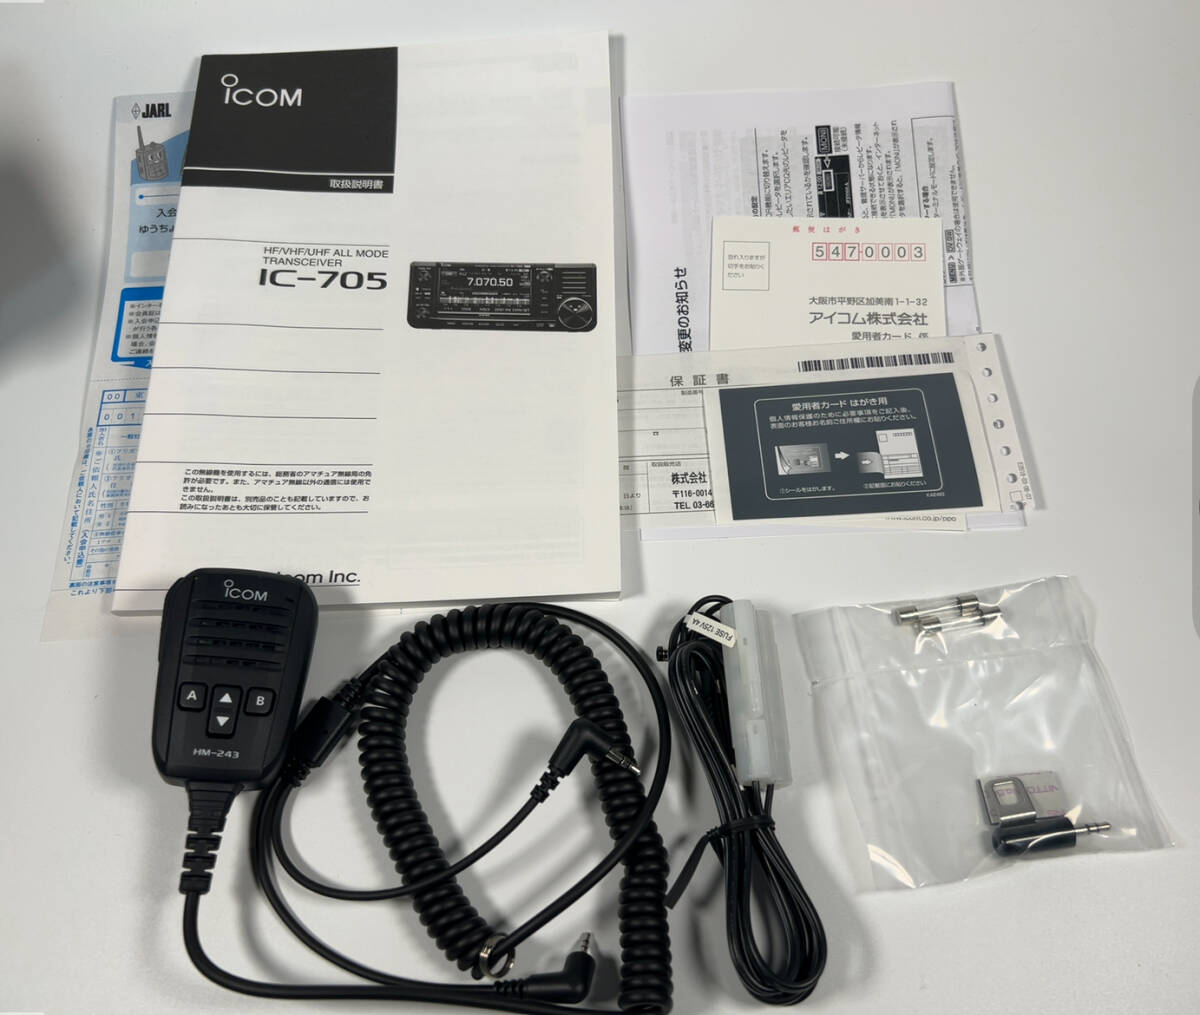 [ almost new goods ]ICOM IC-705 HF/VHF/UHF All Mode transceiver D-Star correspondence manufacturer guarantee 2 month till equipped 